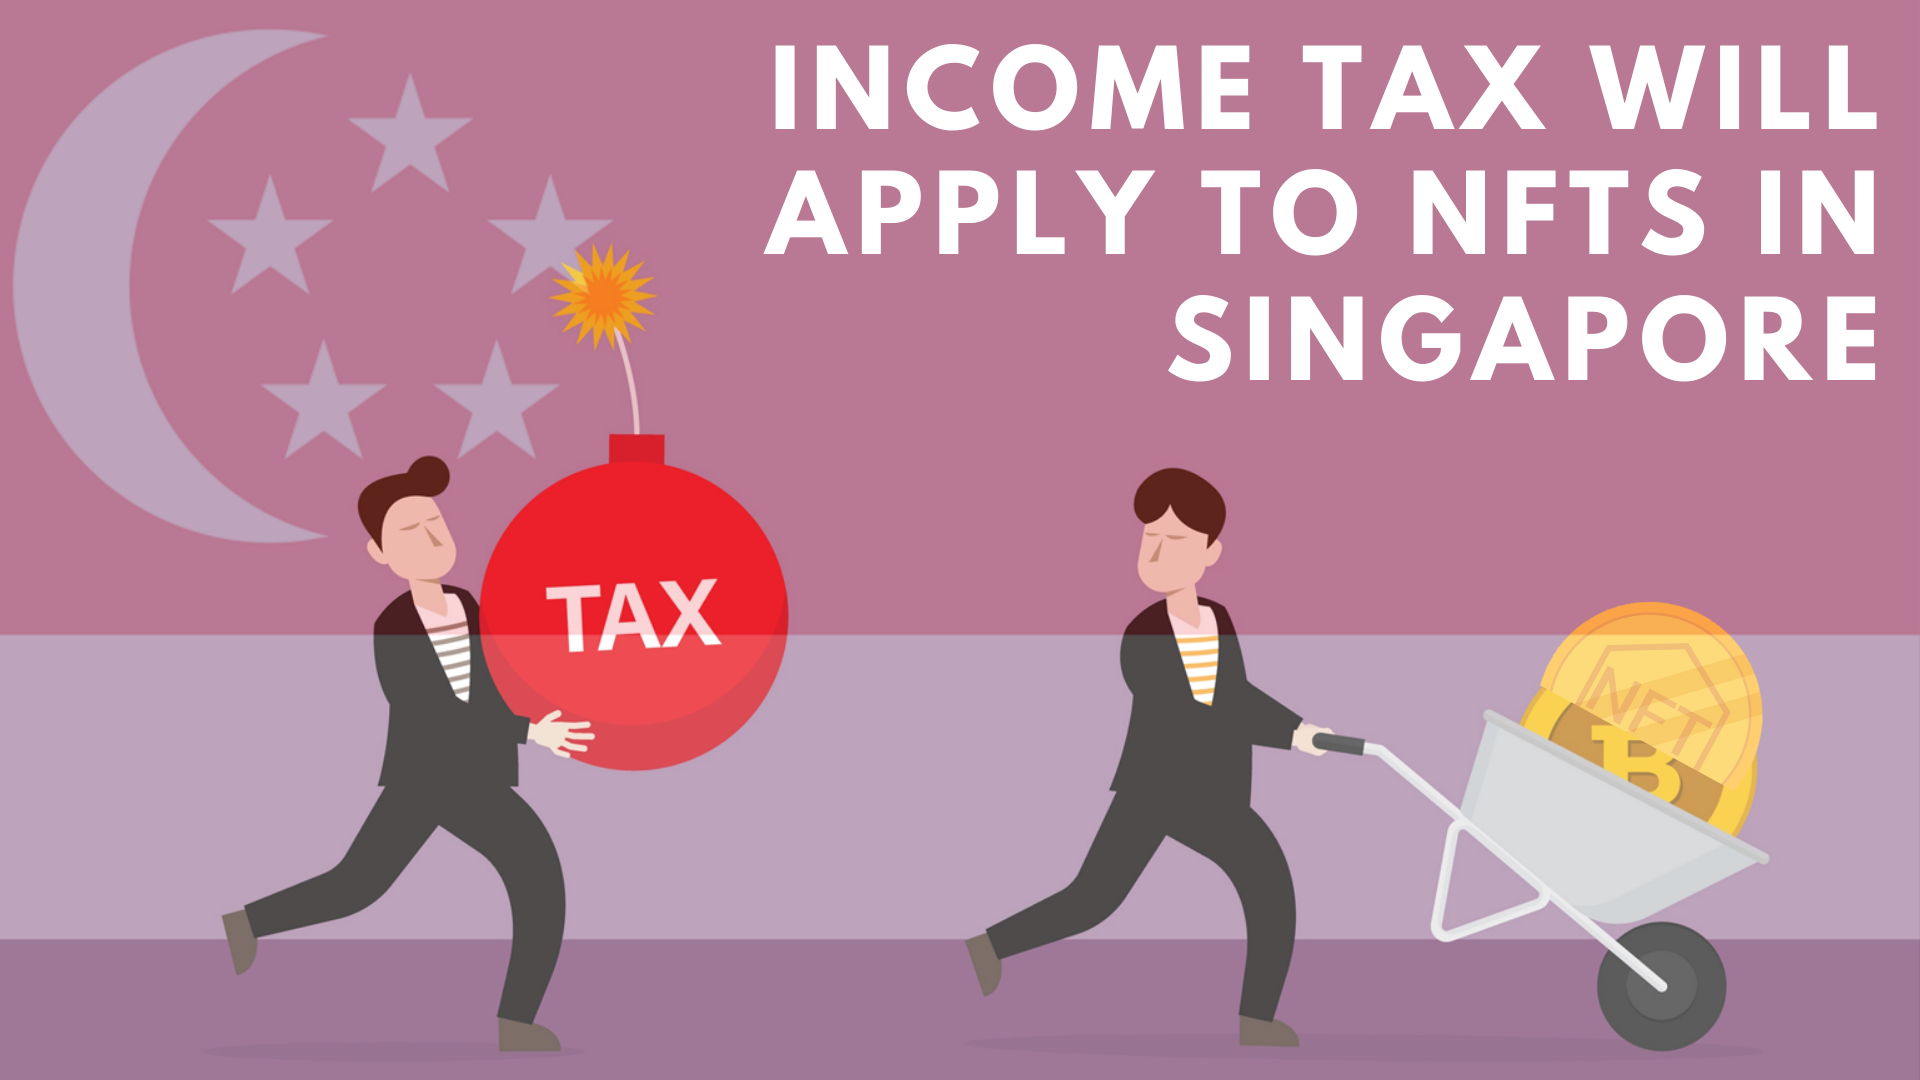 INCOME TAX WILL APPLY TO NFTS IN SINGAPORE